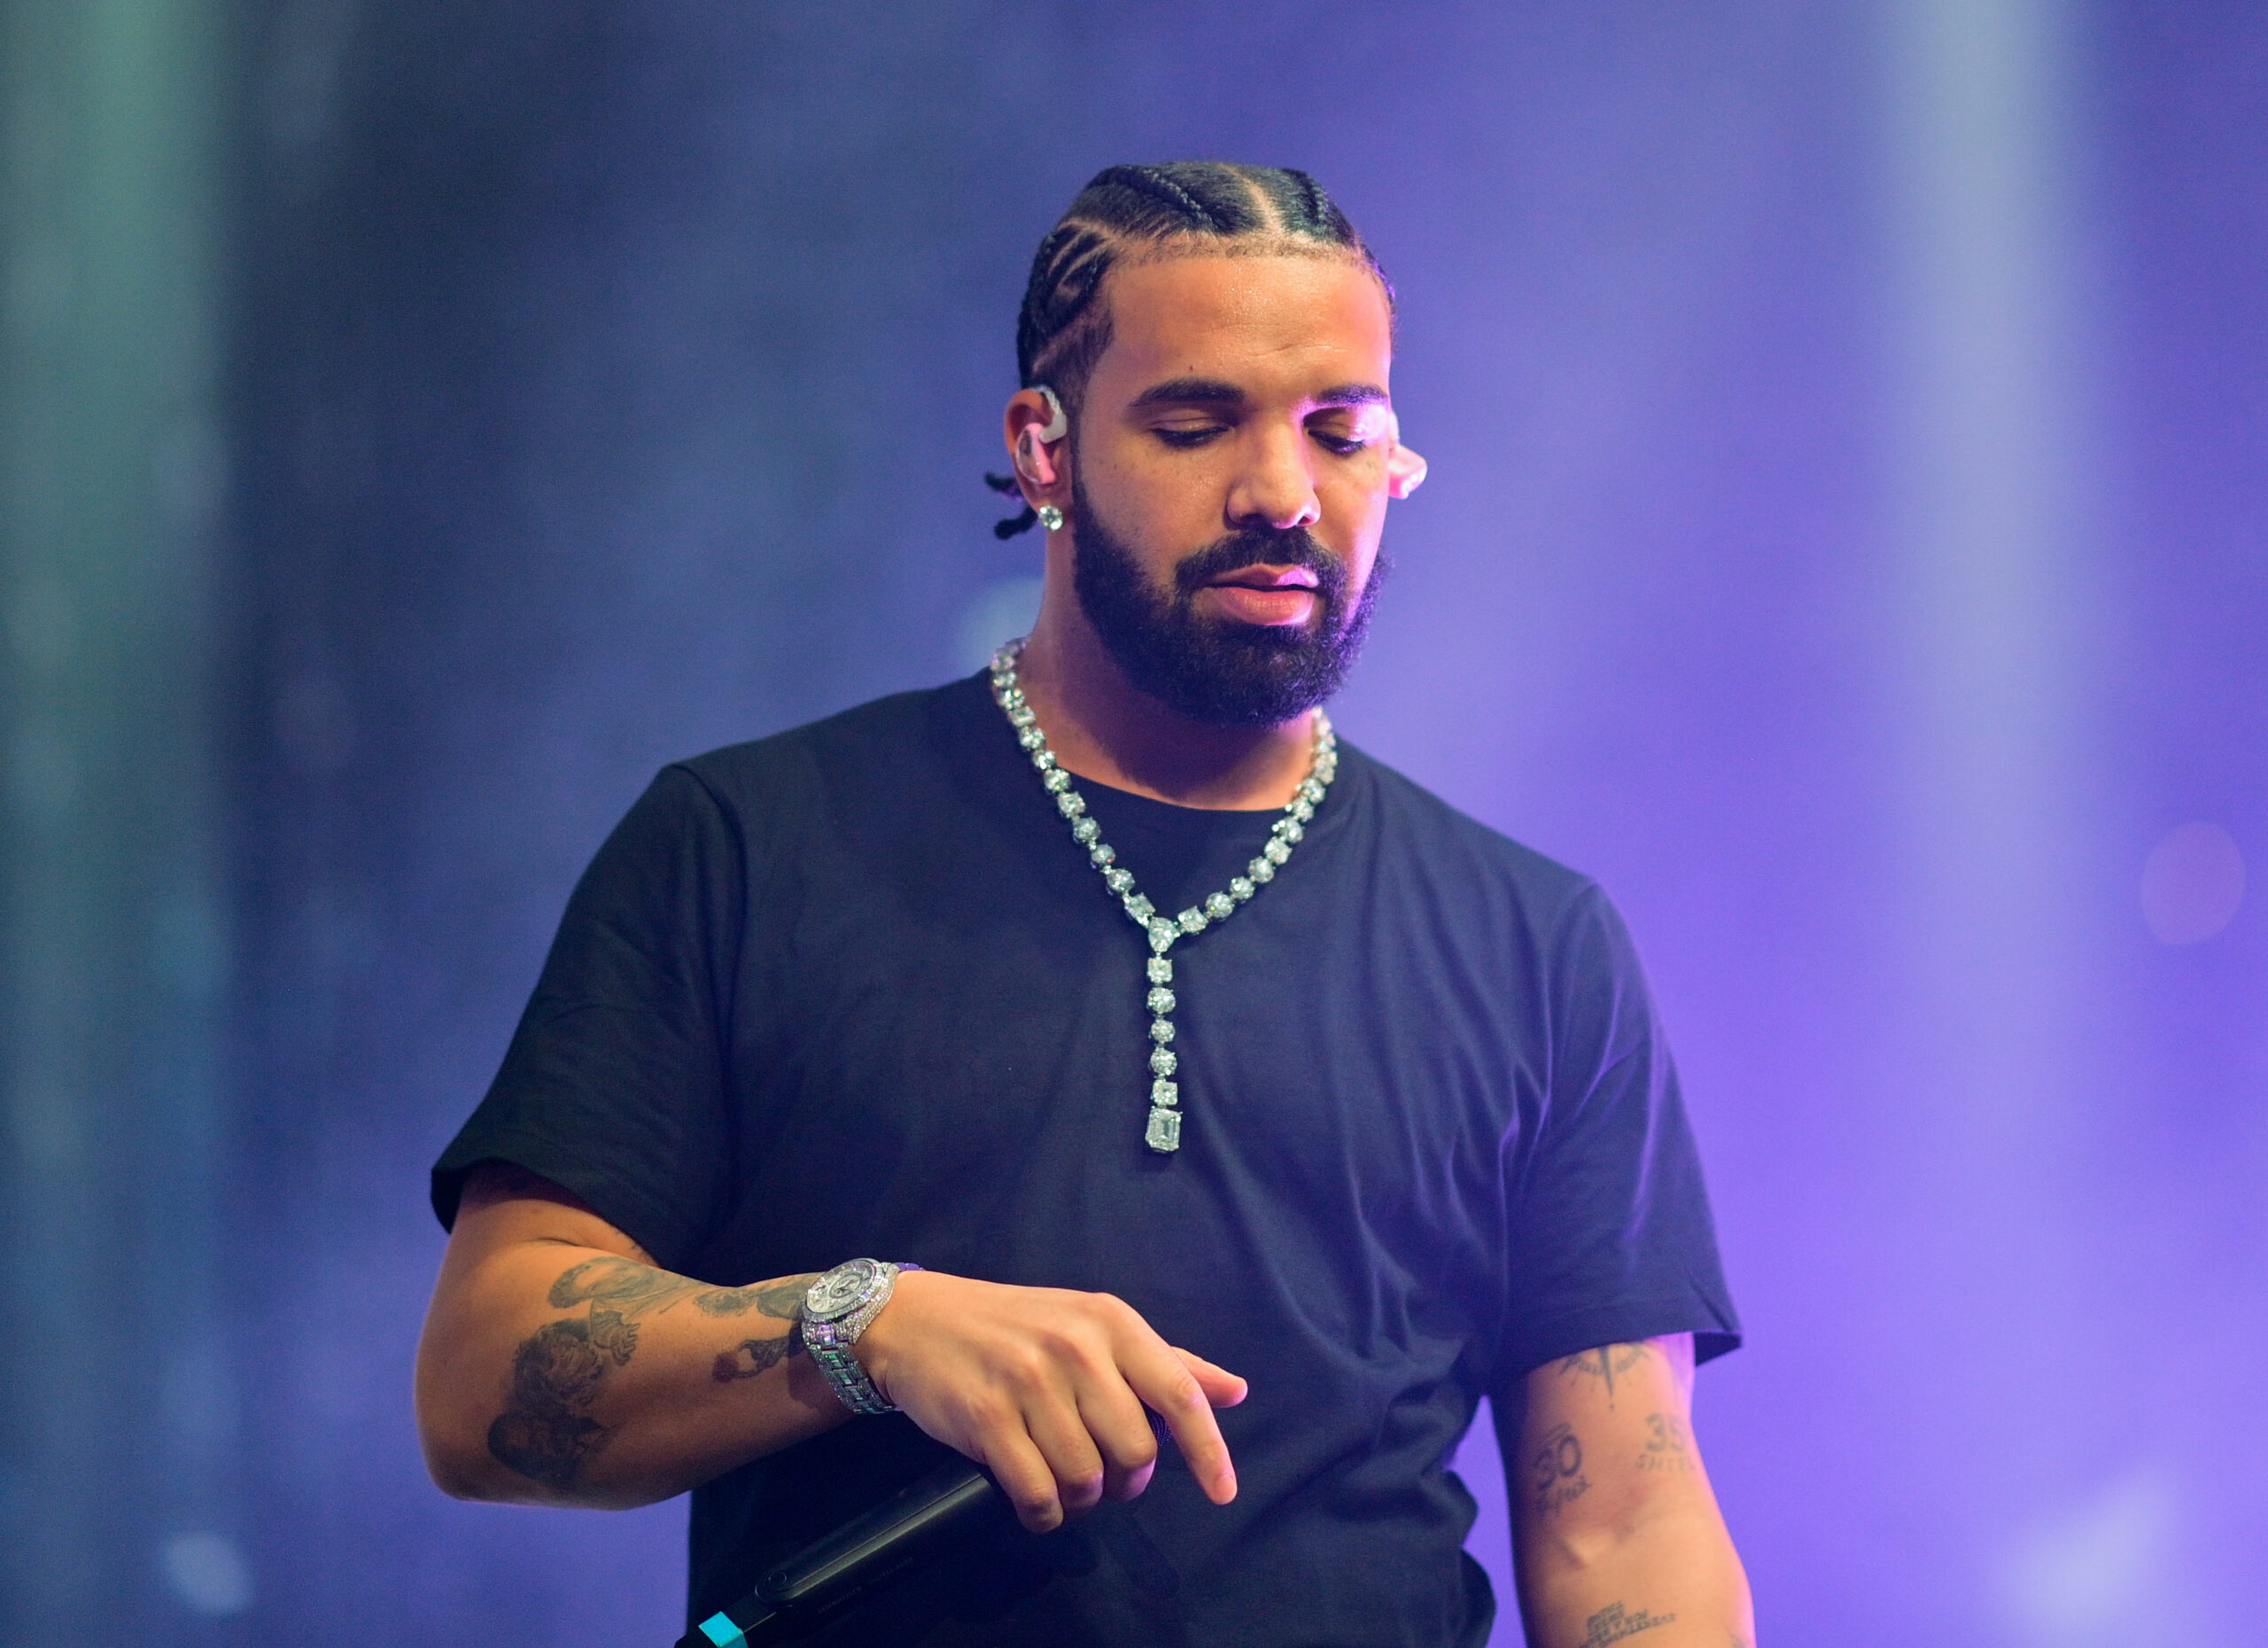 Where does Drake live? He has multiple properties in and outside of the U.S. Pictured: Drake performing at a concert